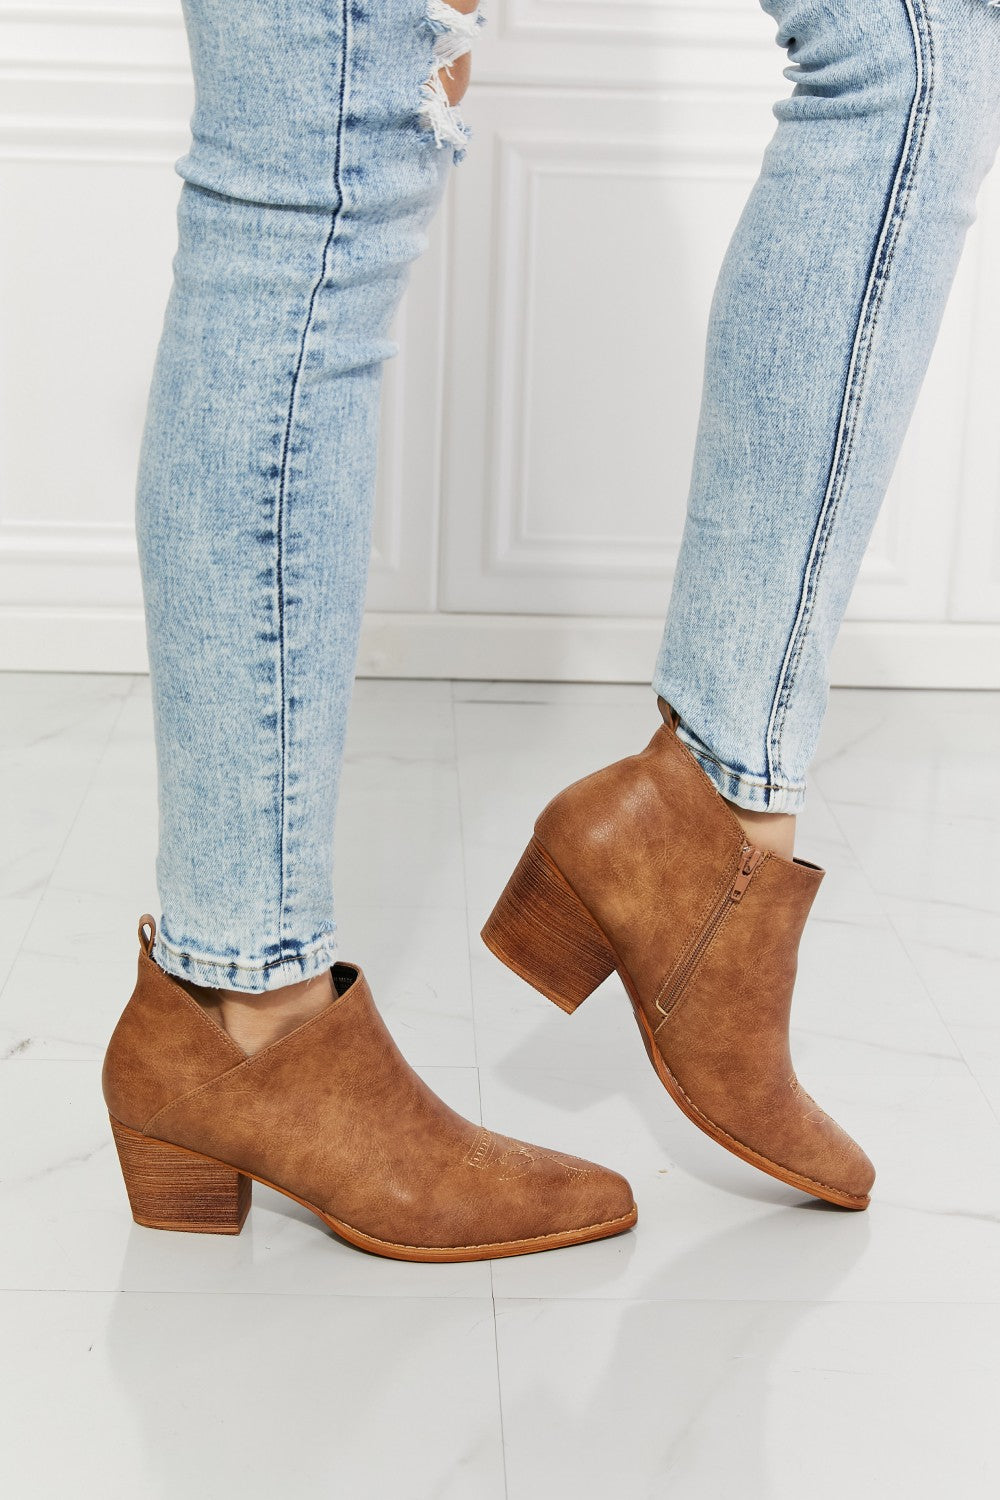 Light Gray MMShoes Trust Yourself Embroidered Crossover Cowboy Bootie in Caramel